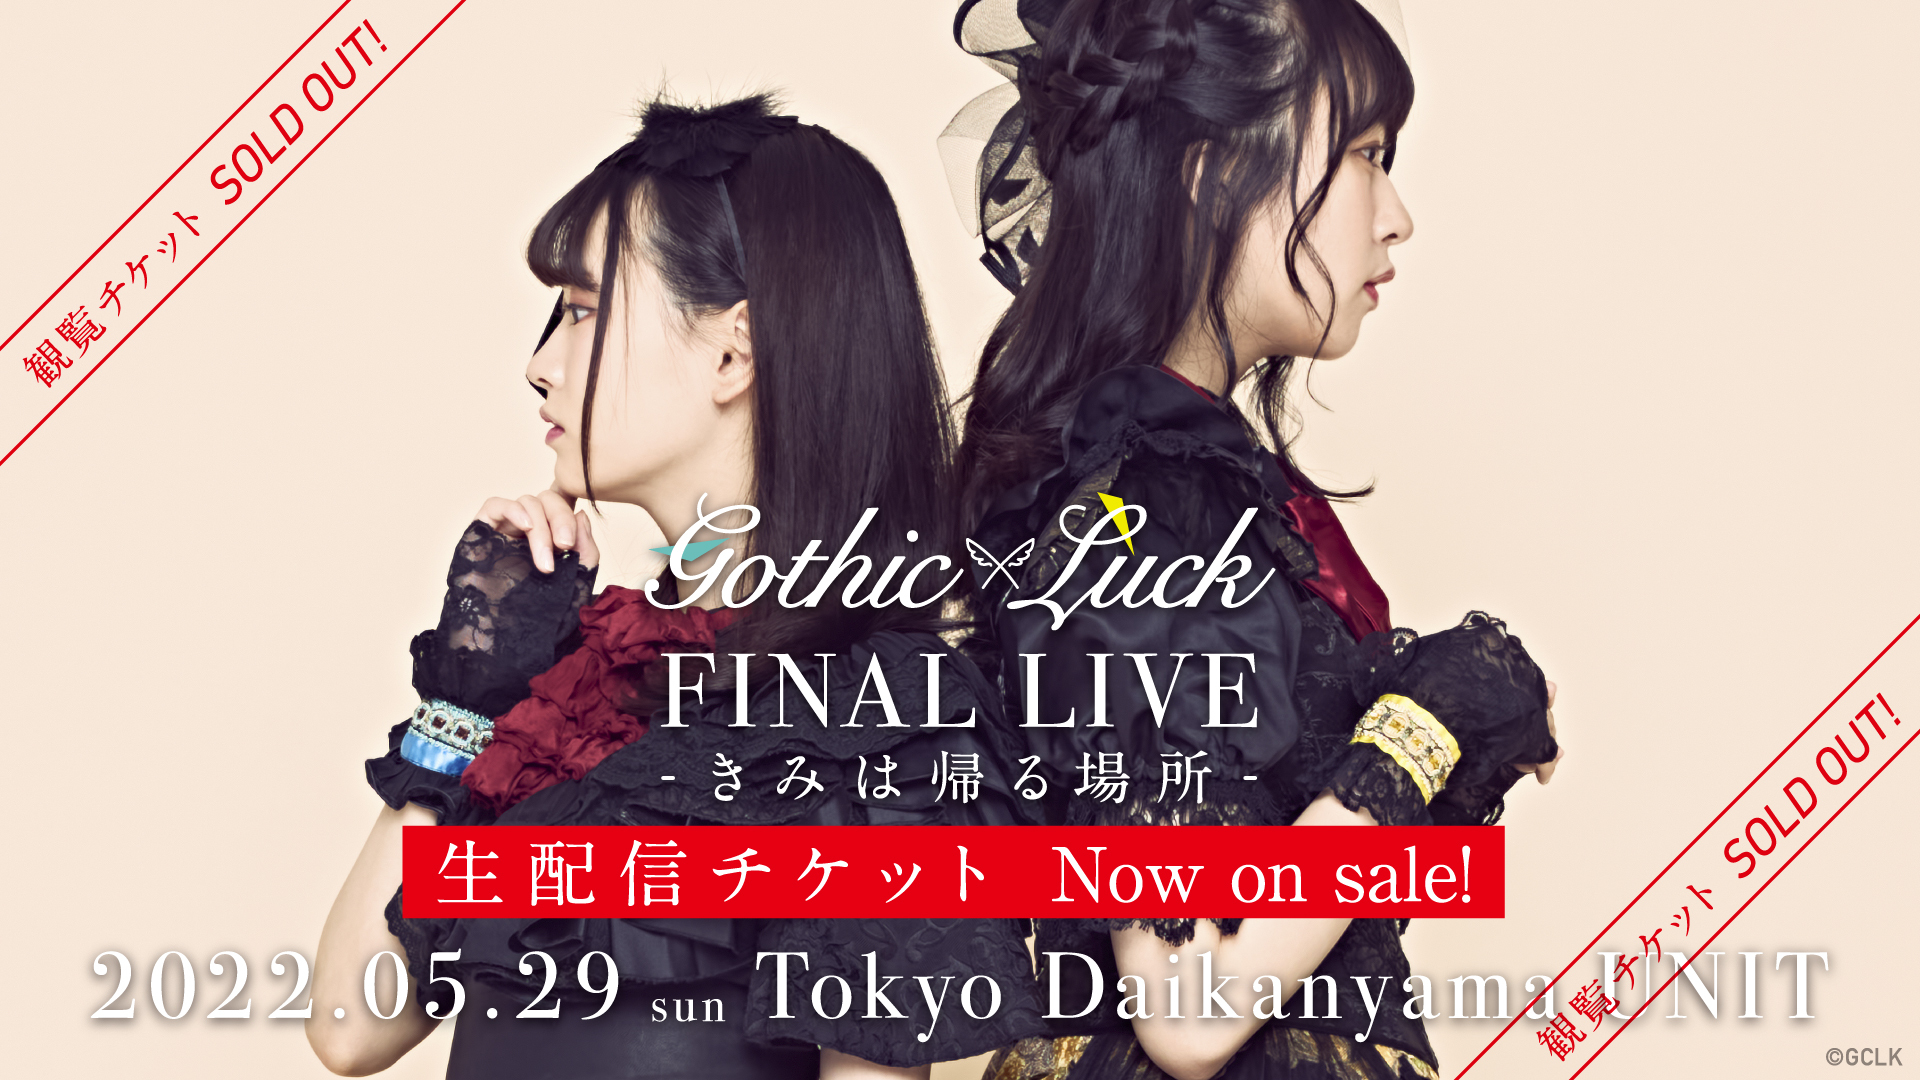 『Gothic×Luck FINAL LIVE -きみは帰る場所-』